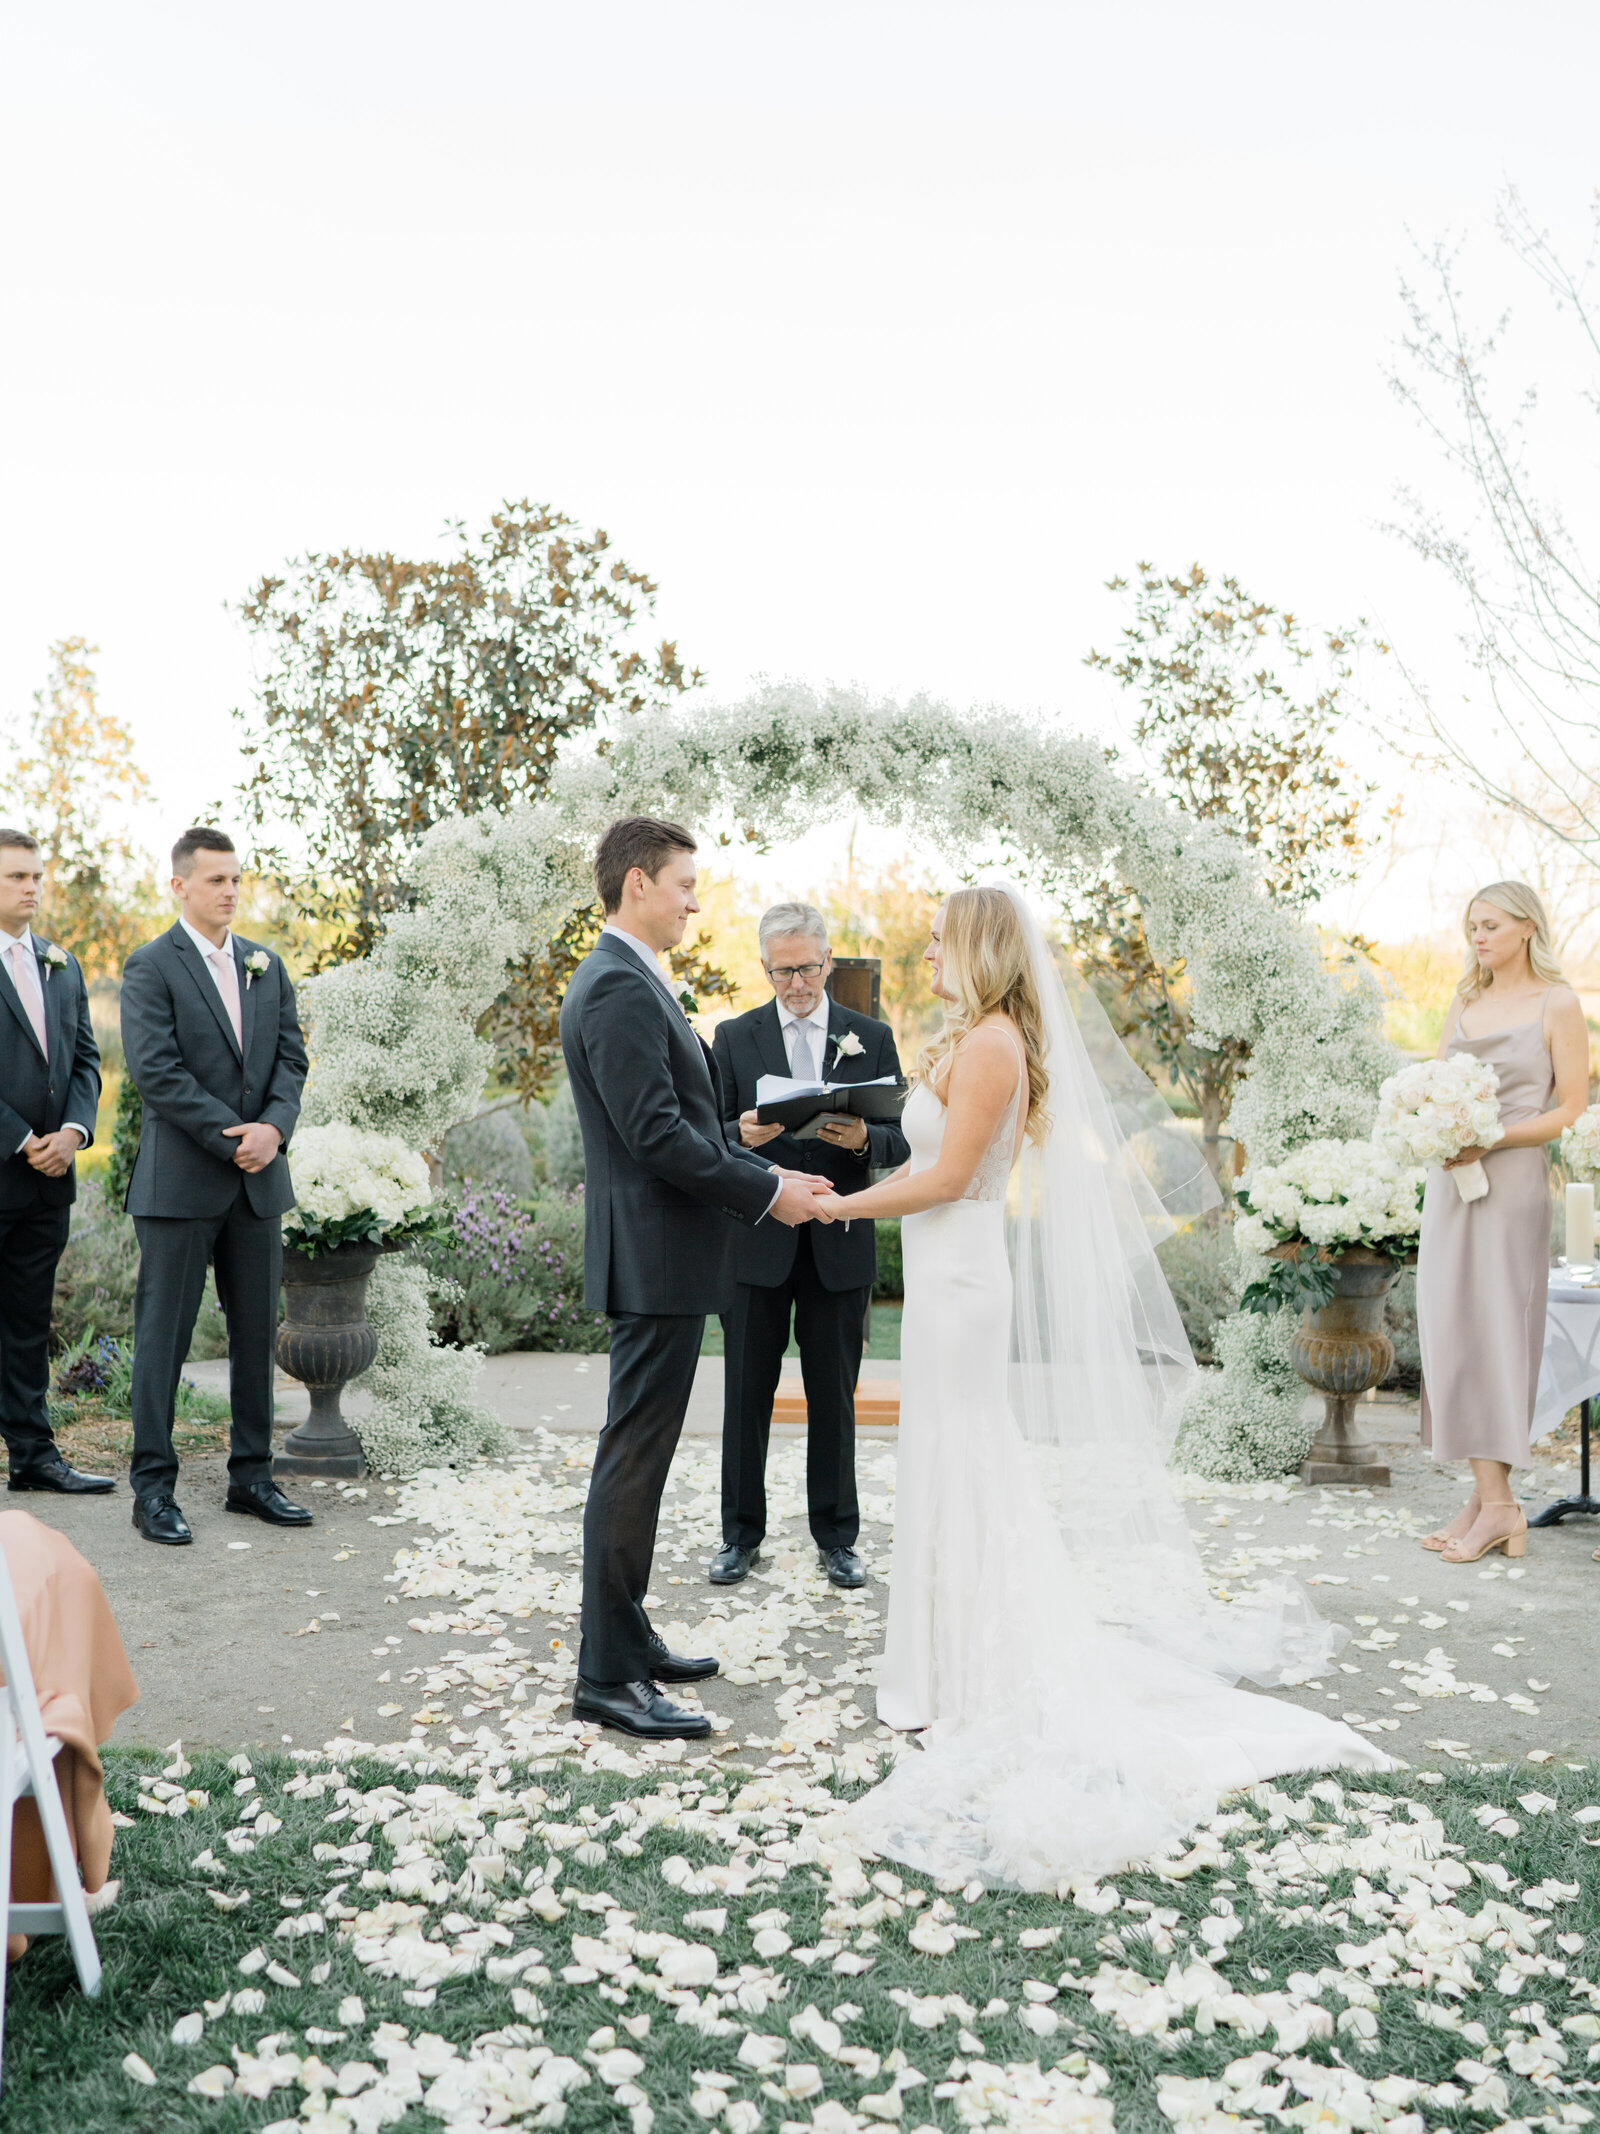 bride and groom exchanging vows at an outdoor ceremony